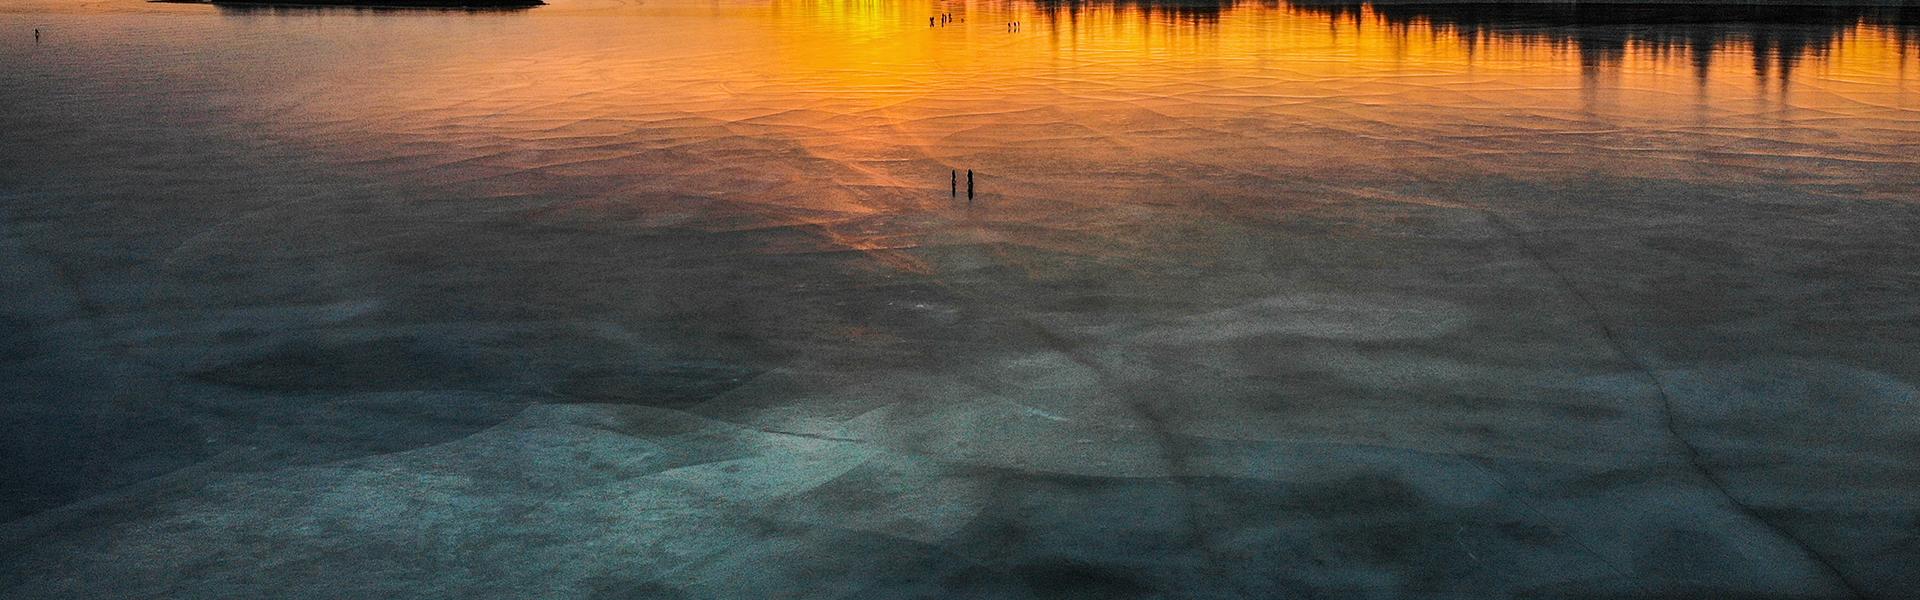 Aerial view of frozen Dragon Lake during a vibrant sunset